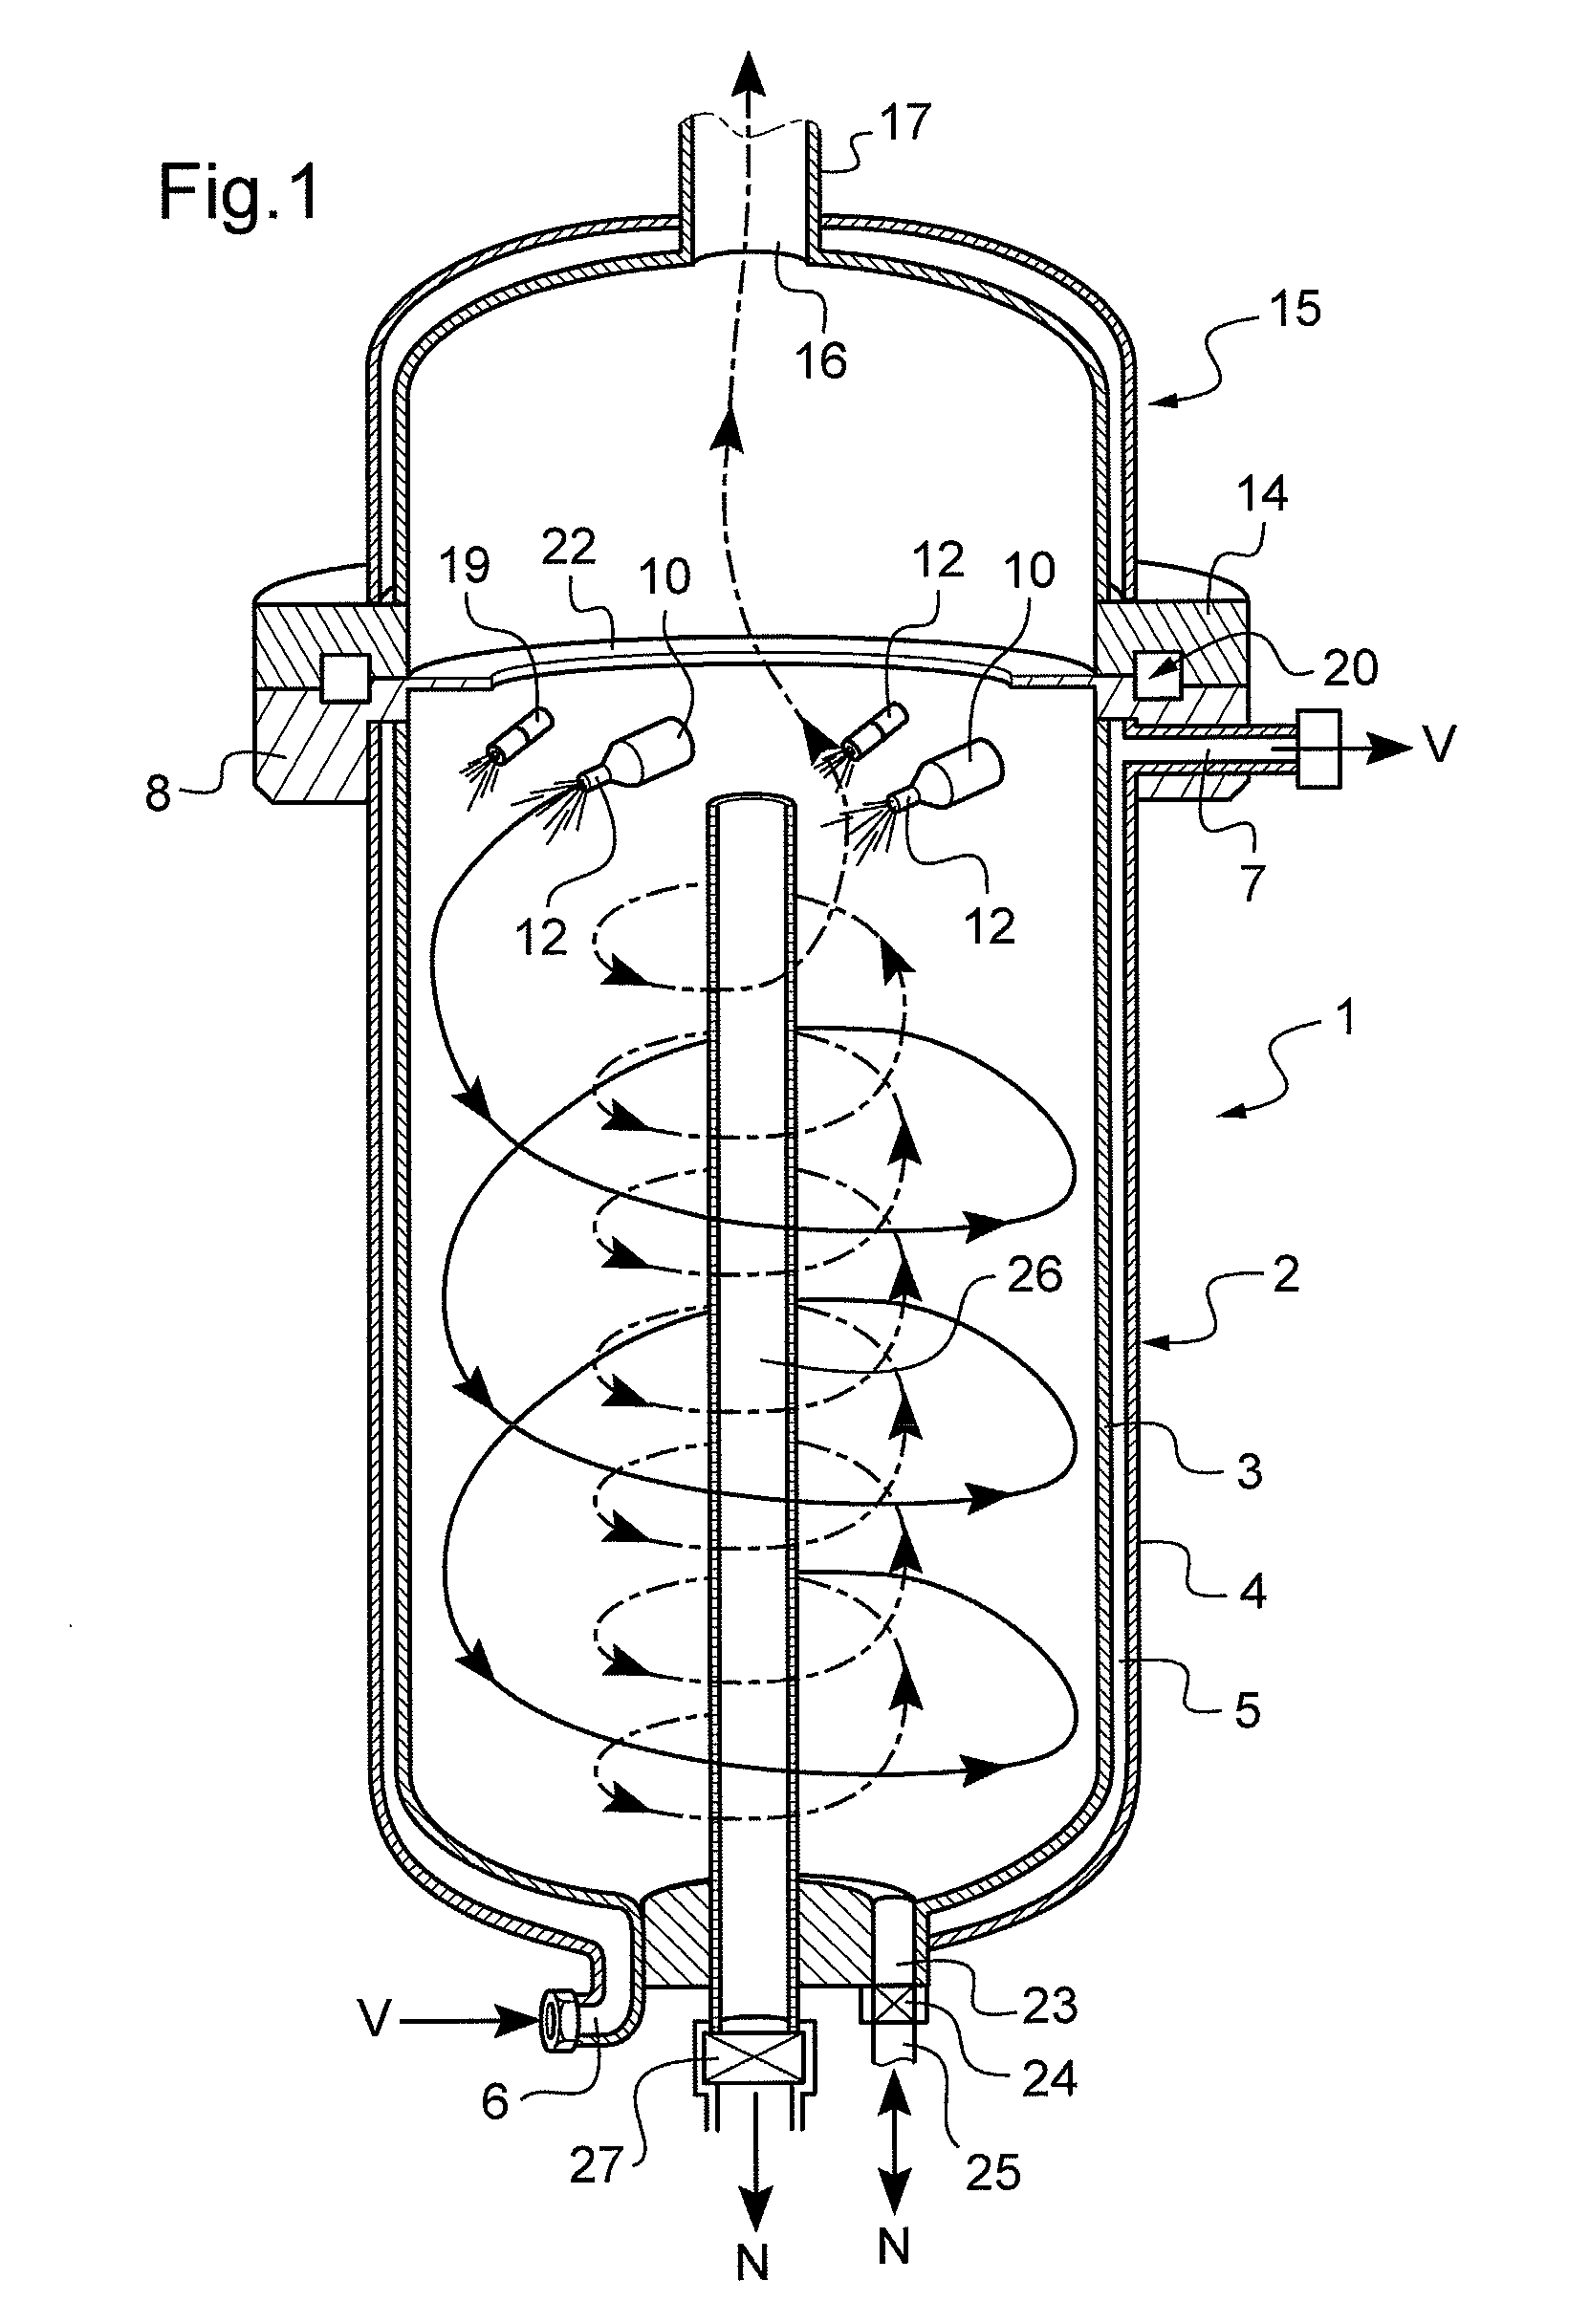 Device for evaporating a treatment liquid